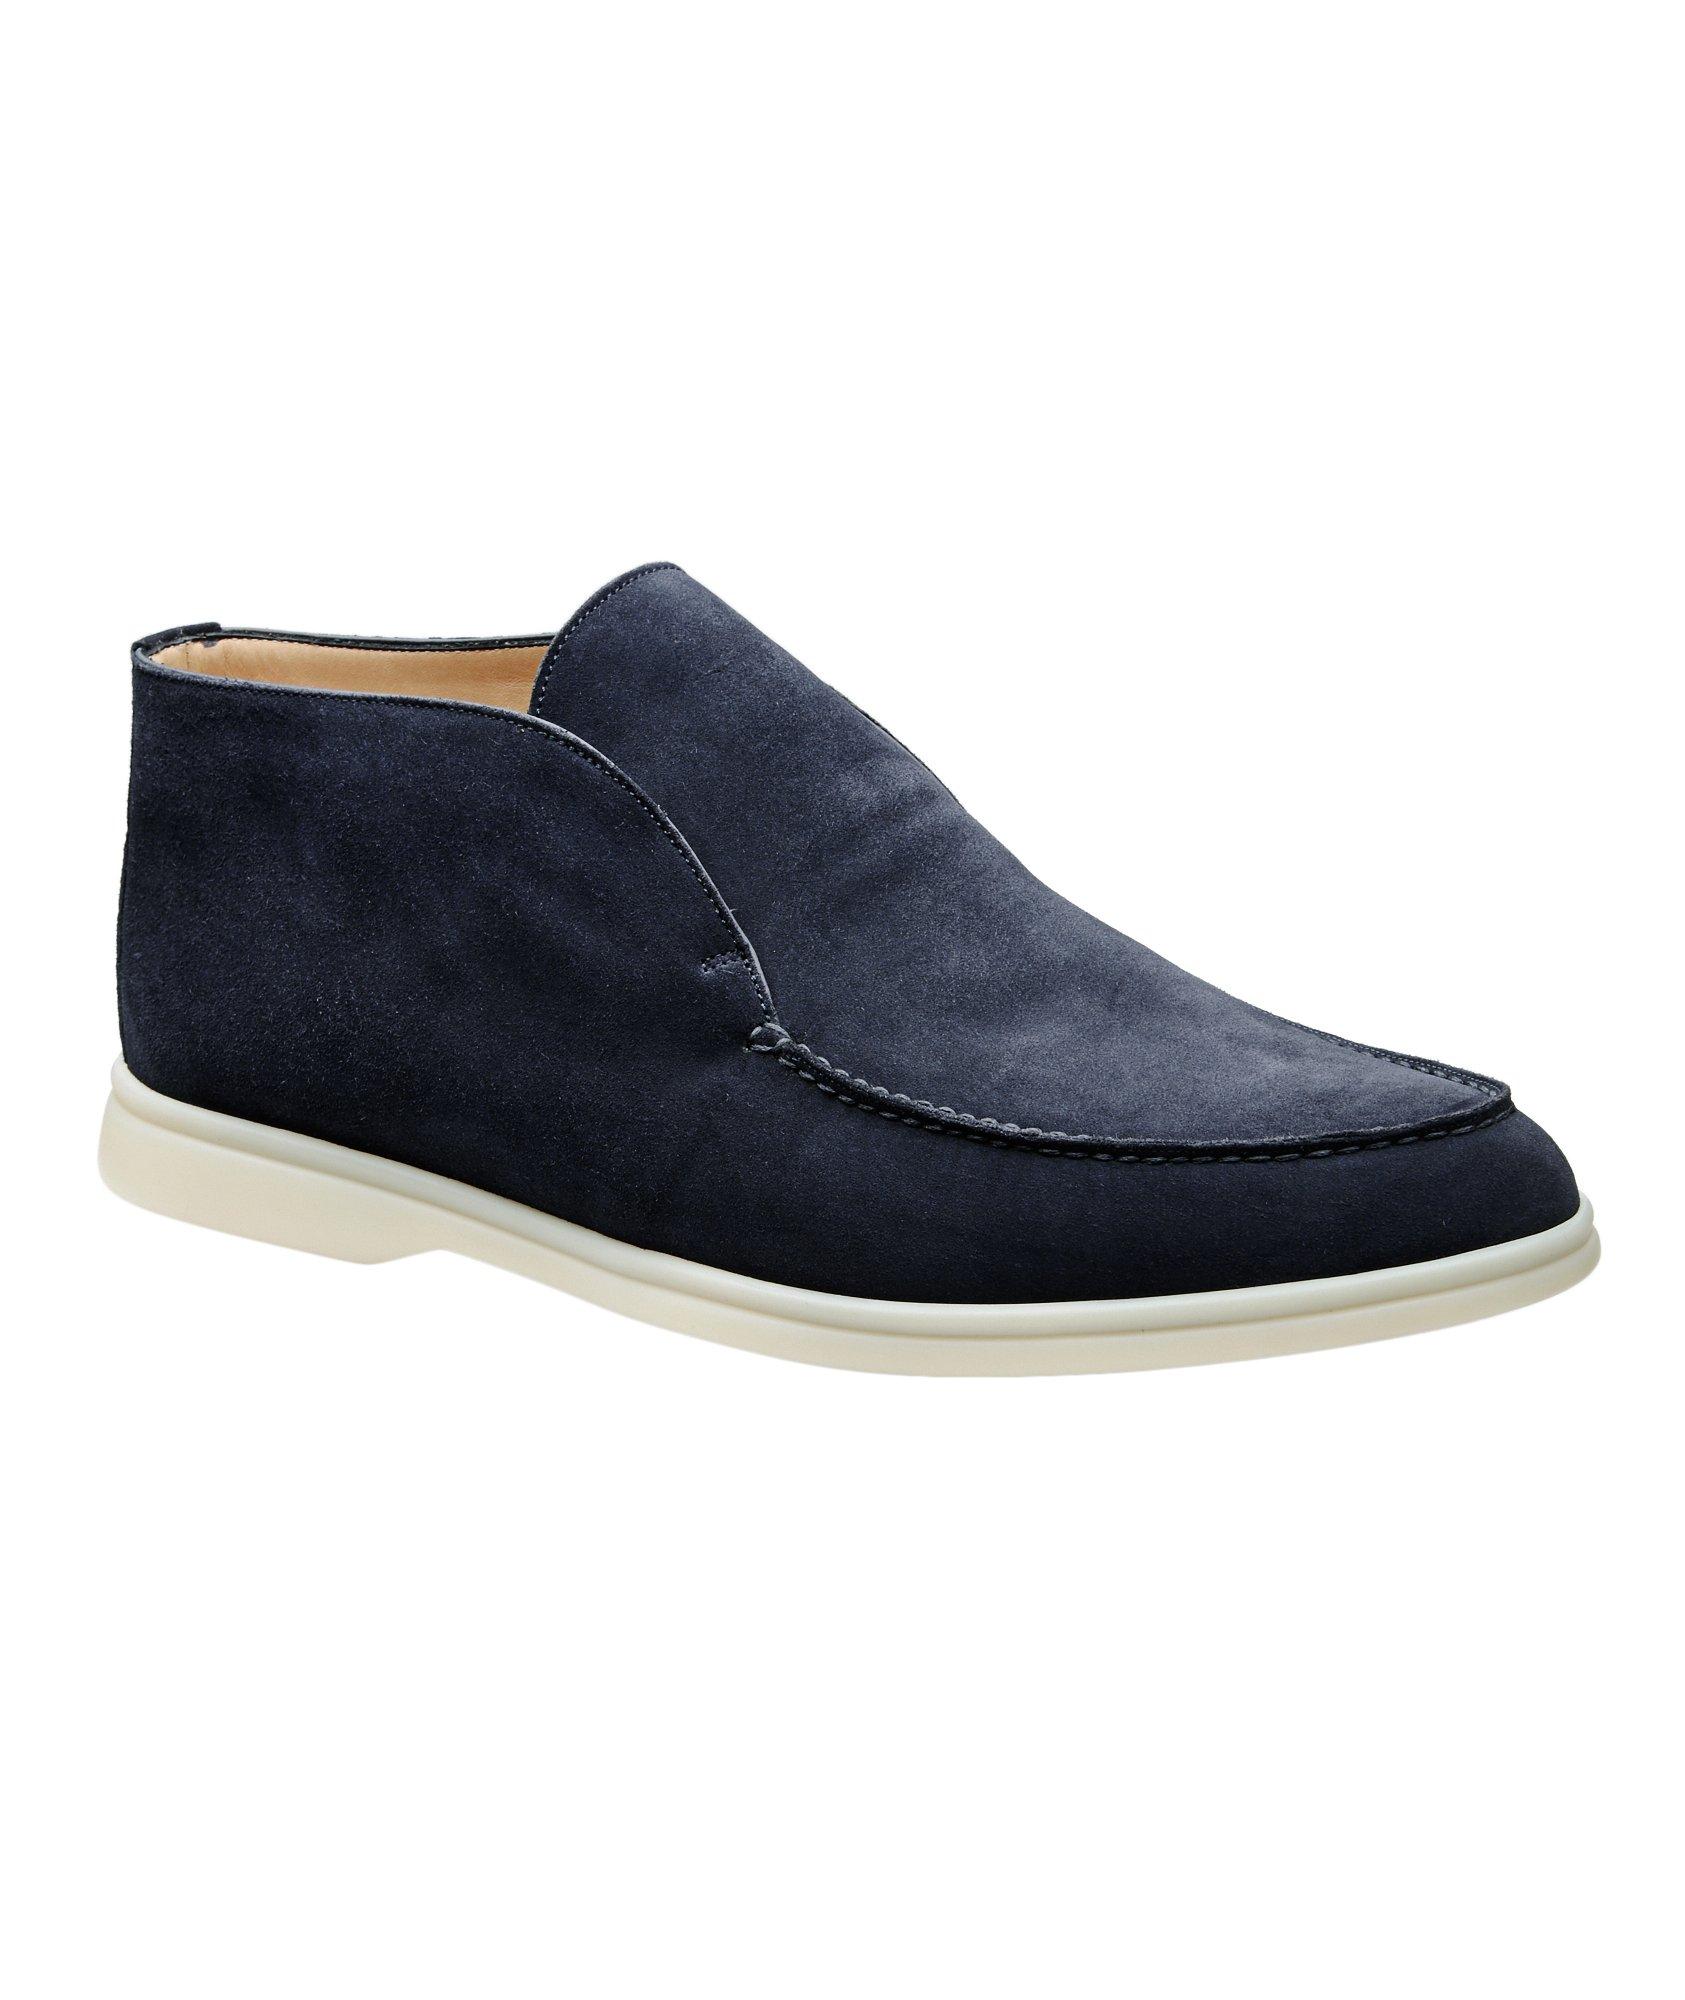 Suede Slip-On Boots image 0